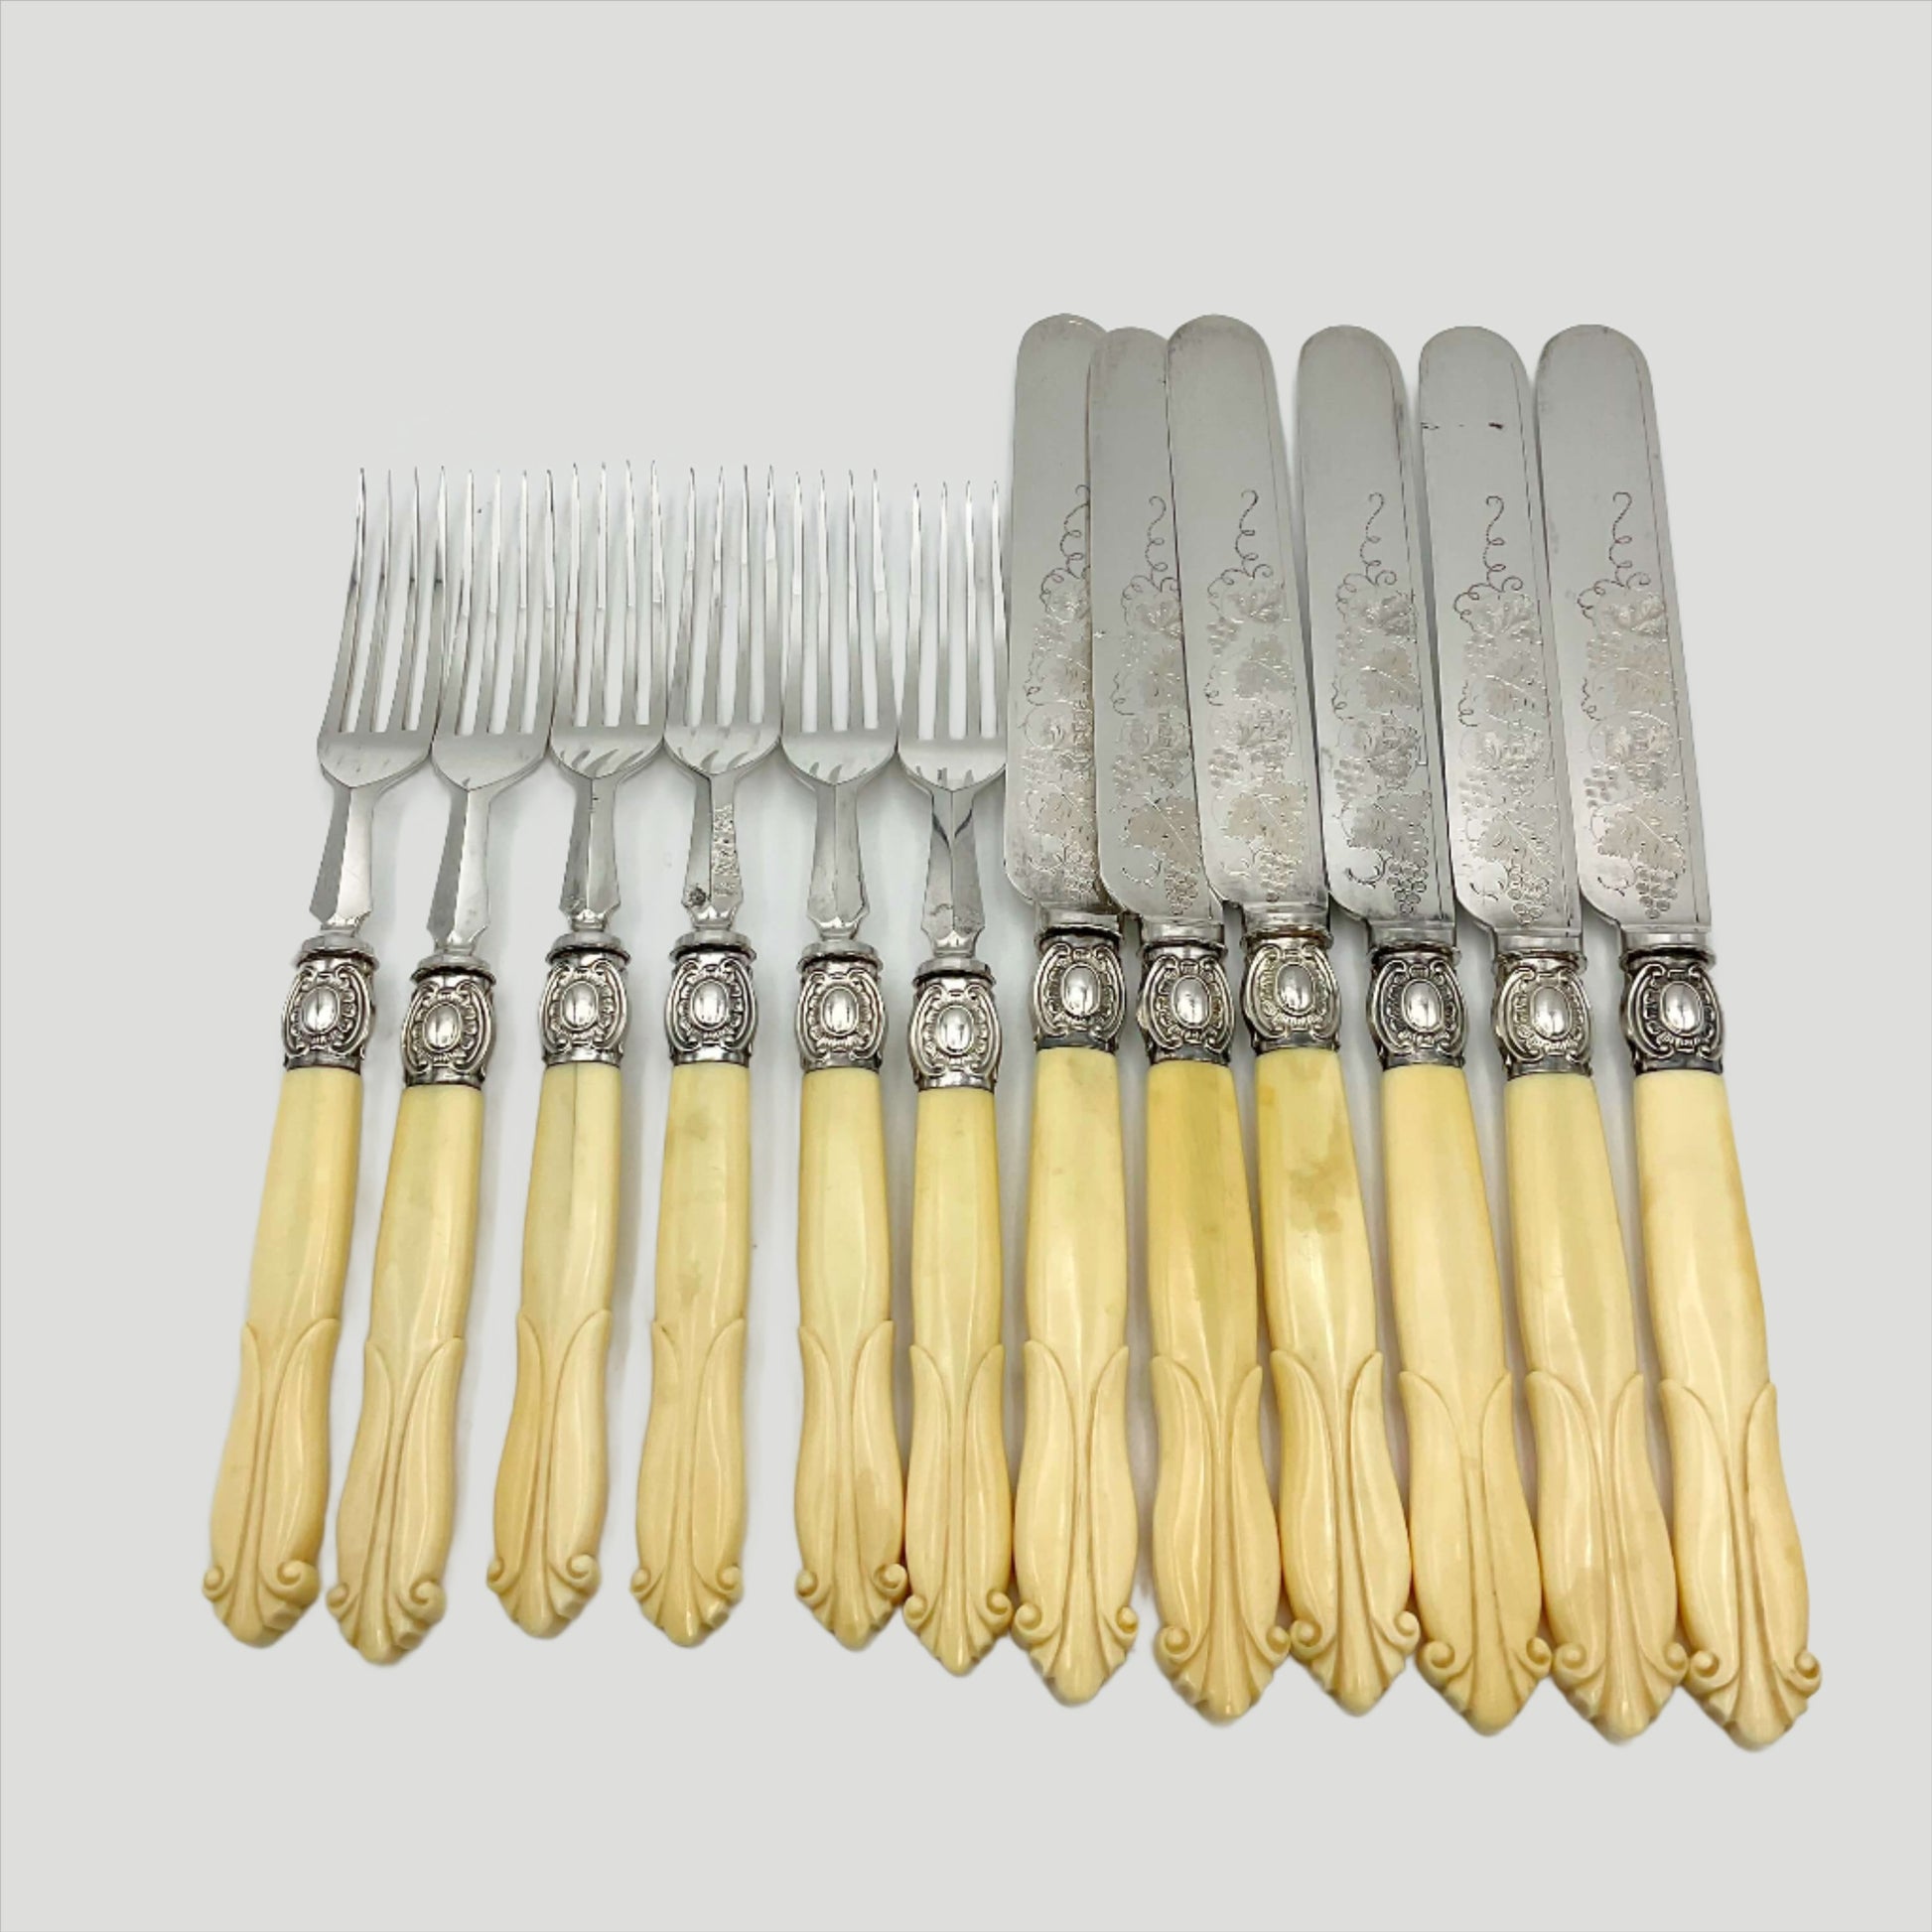 Antique silver plated dessert knives and forks with bone handles on a white background